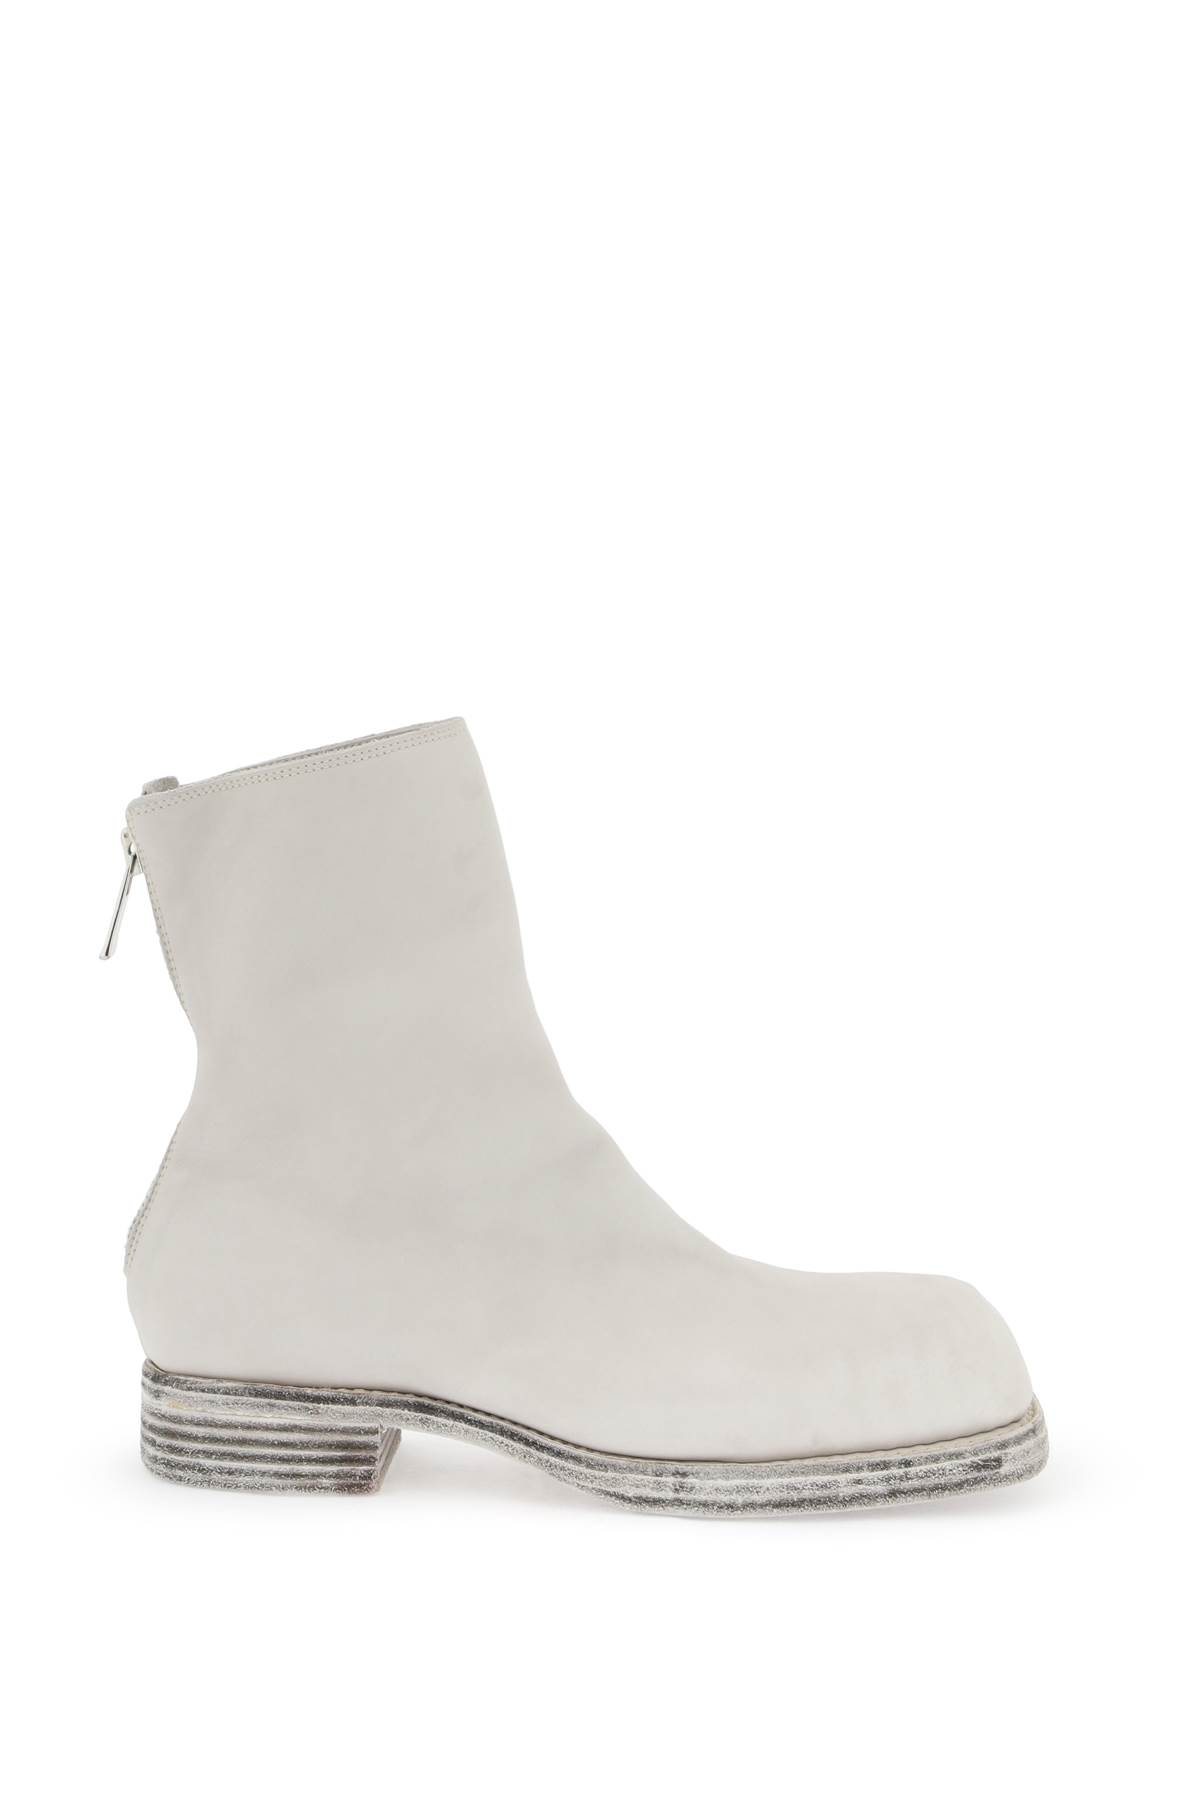 Shop Guidi Leather Ankle Boots In Co156t (grey)